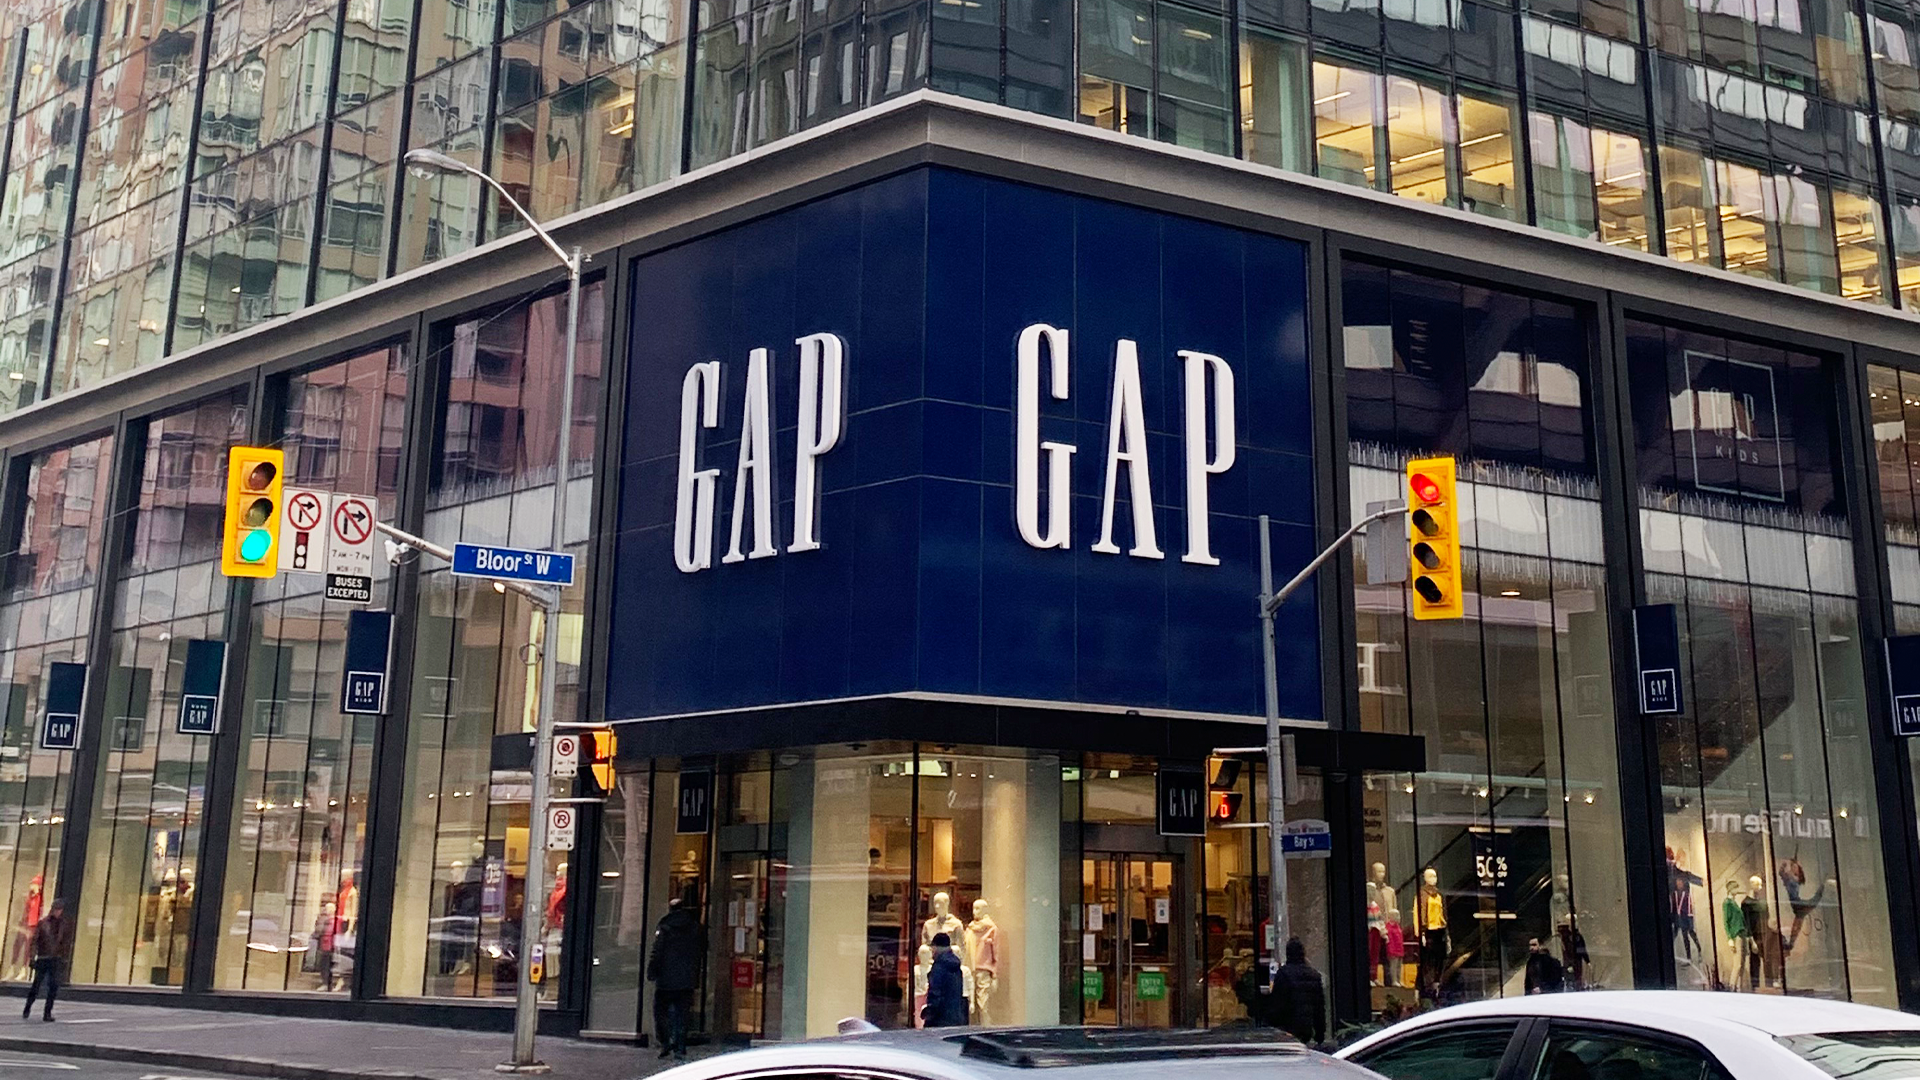 The Gap to close long-time Toronto flagship store in January